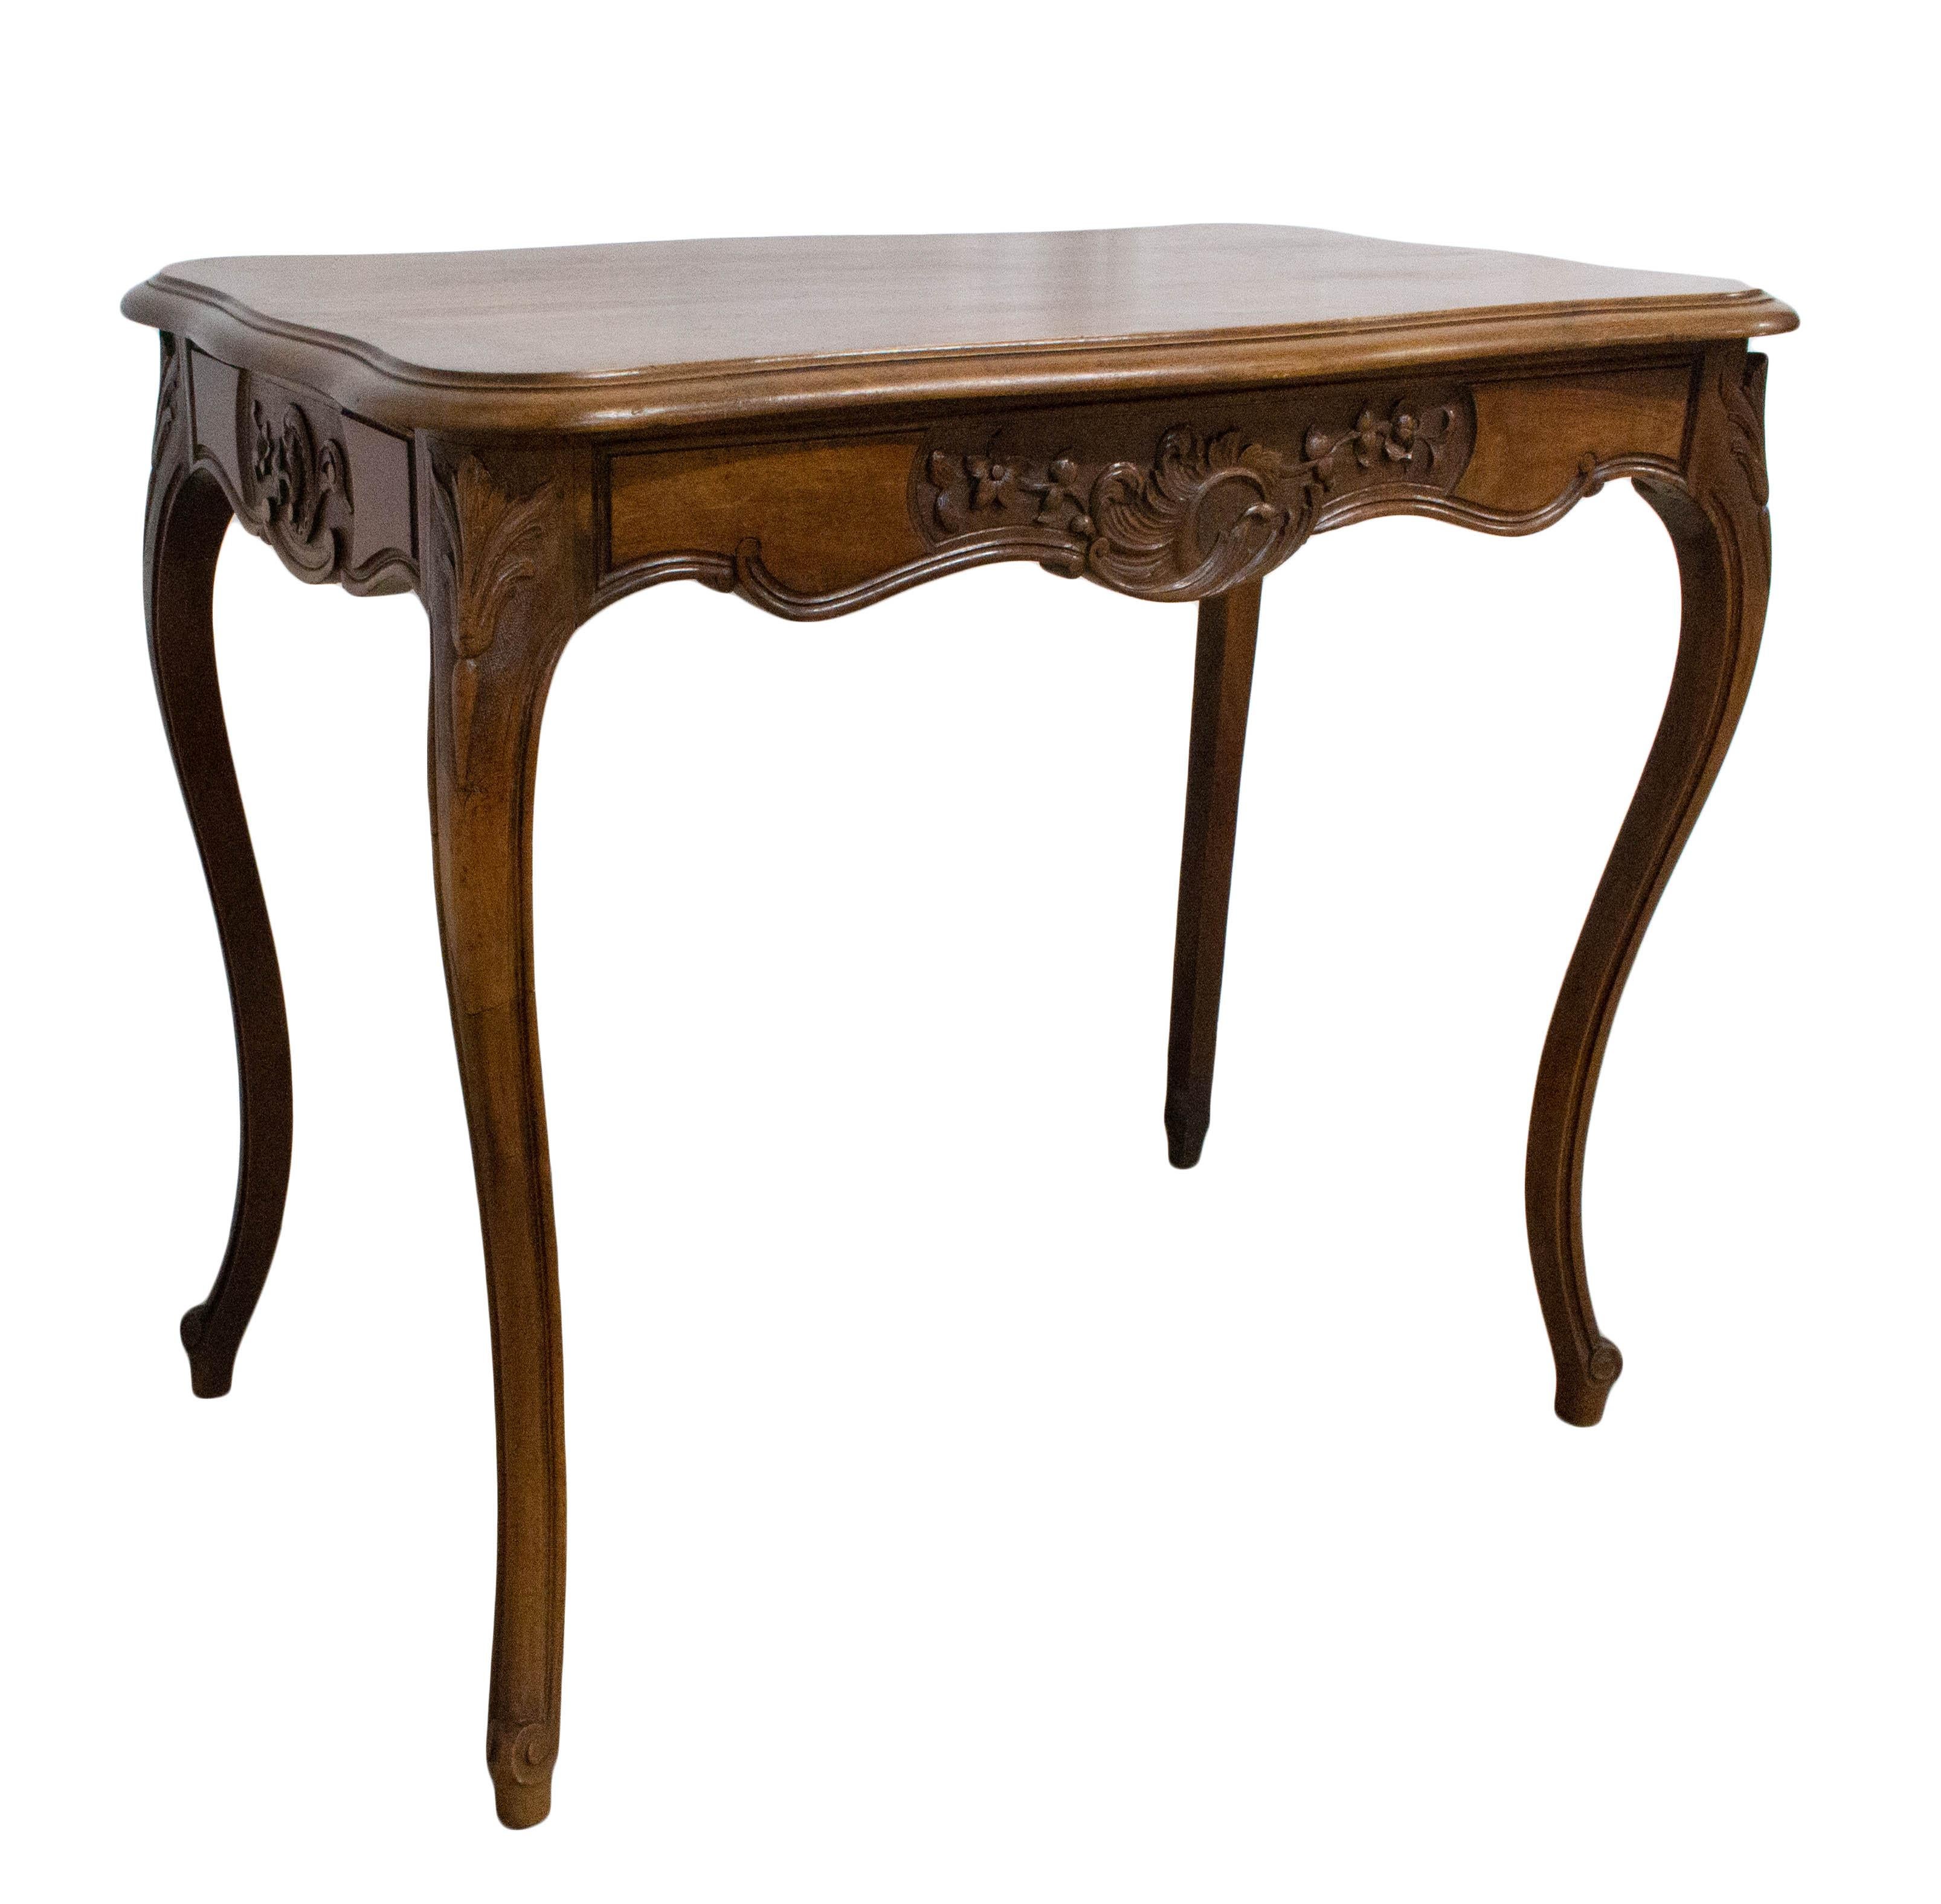 French Rocaille style writing table, little desk or side table, circa 1950.
Good condition

For shipping:
W 89.5, D 52.5, H 75 8.6kg.